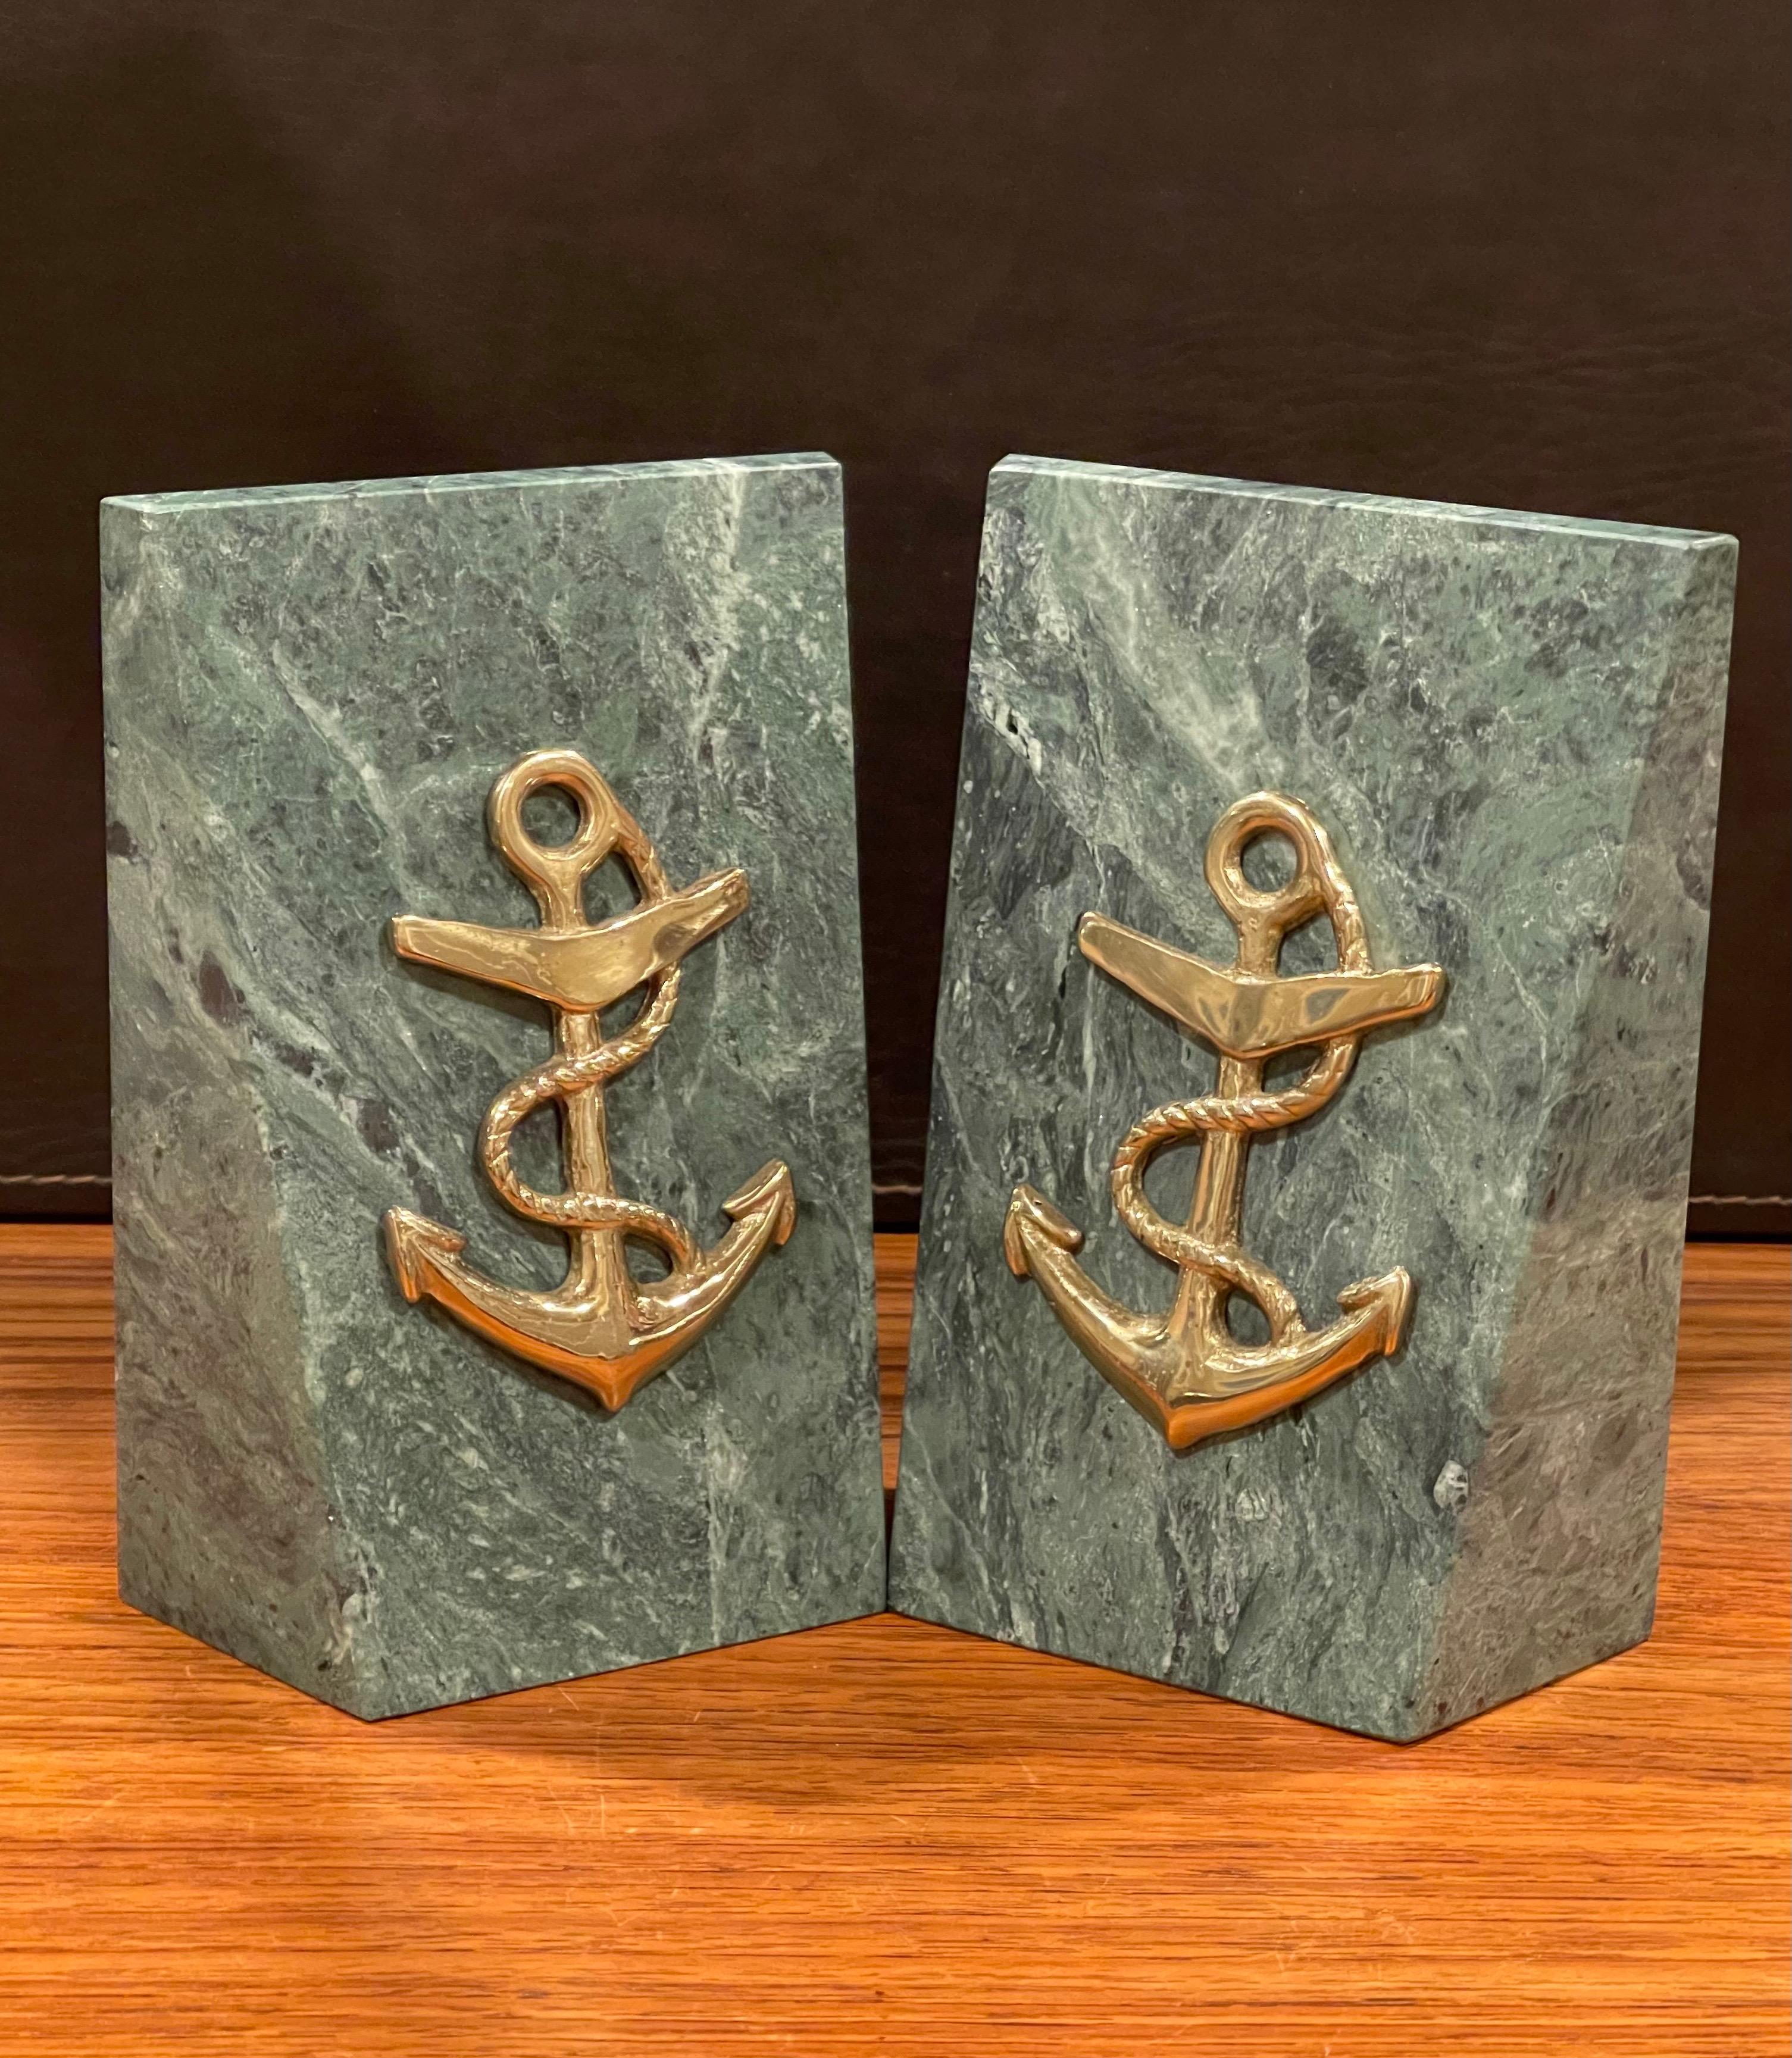 Pair of green solid marble bookends with brass anchor accent, circa 1970s. The set are in very good vintage condition with no chips or cracks and measure 5